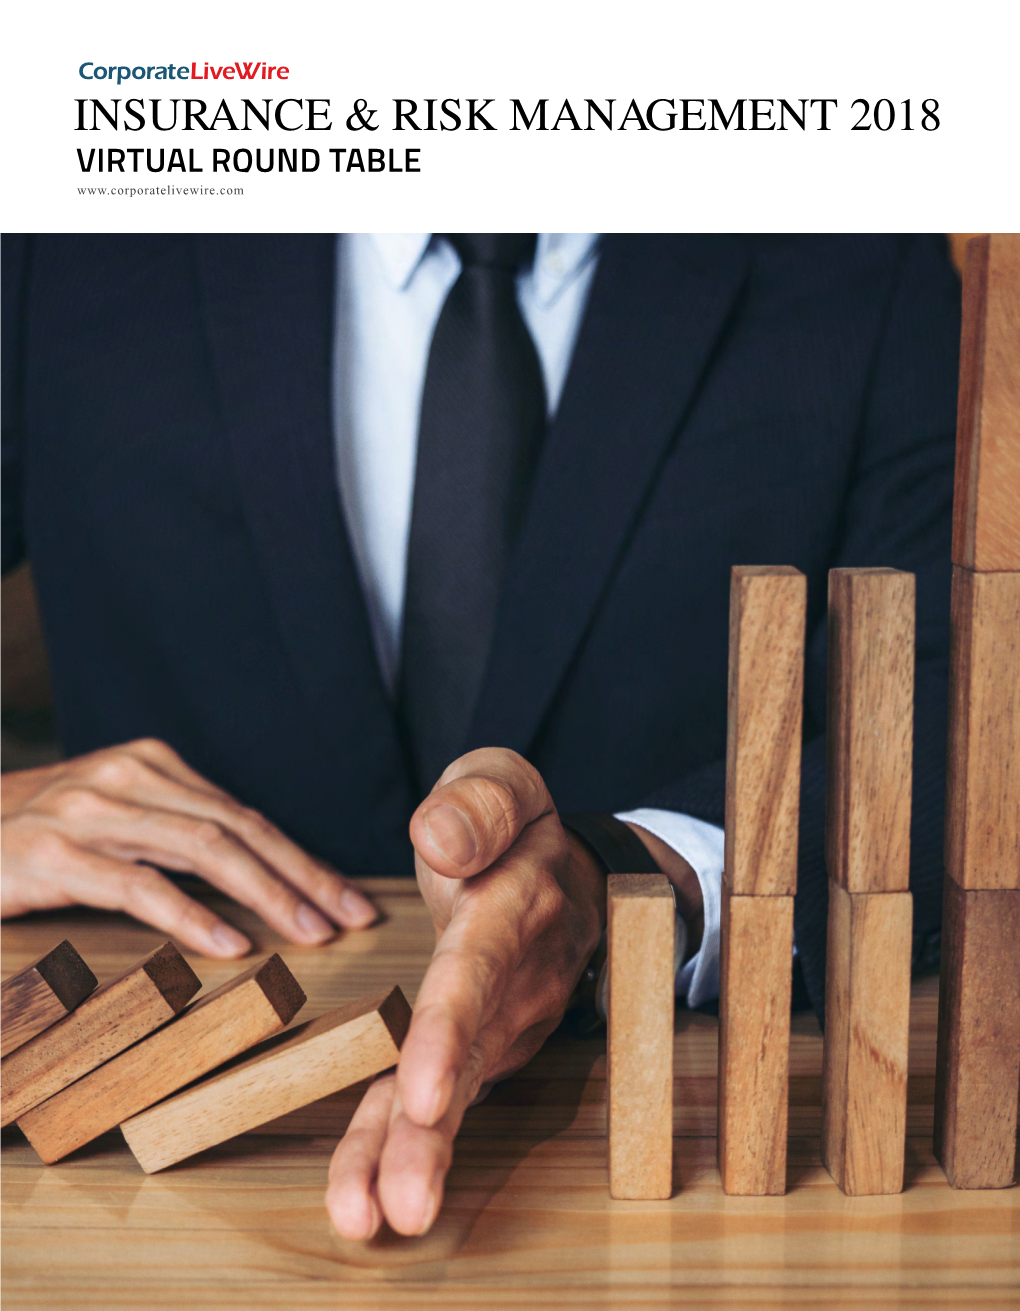 Insurance & Risk Management 2018: Virtual Round Table